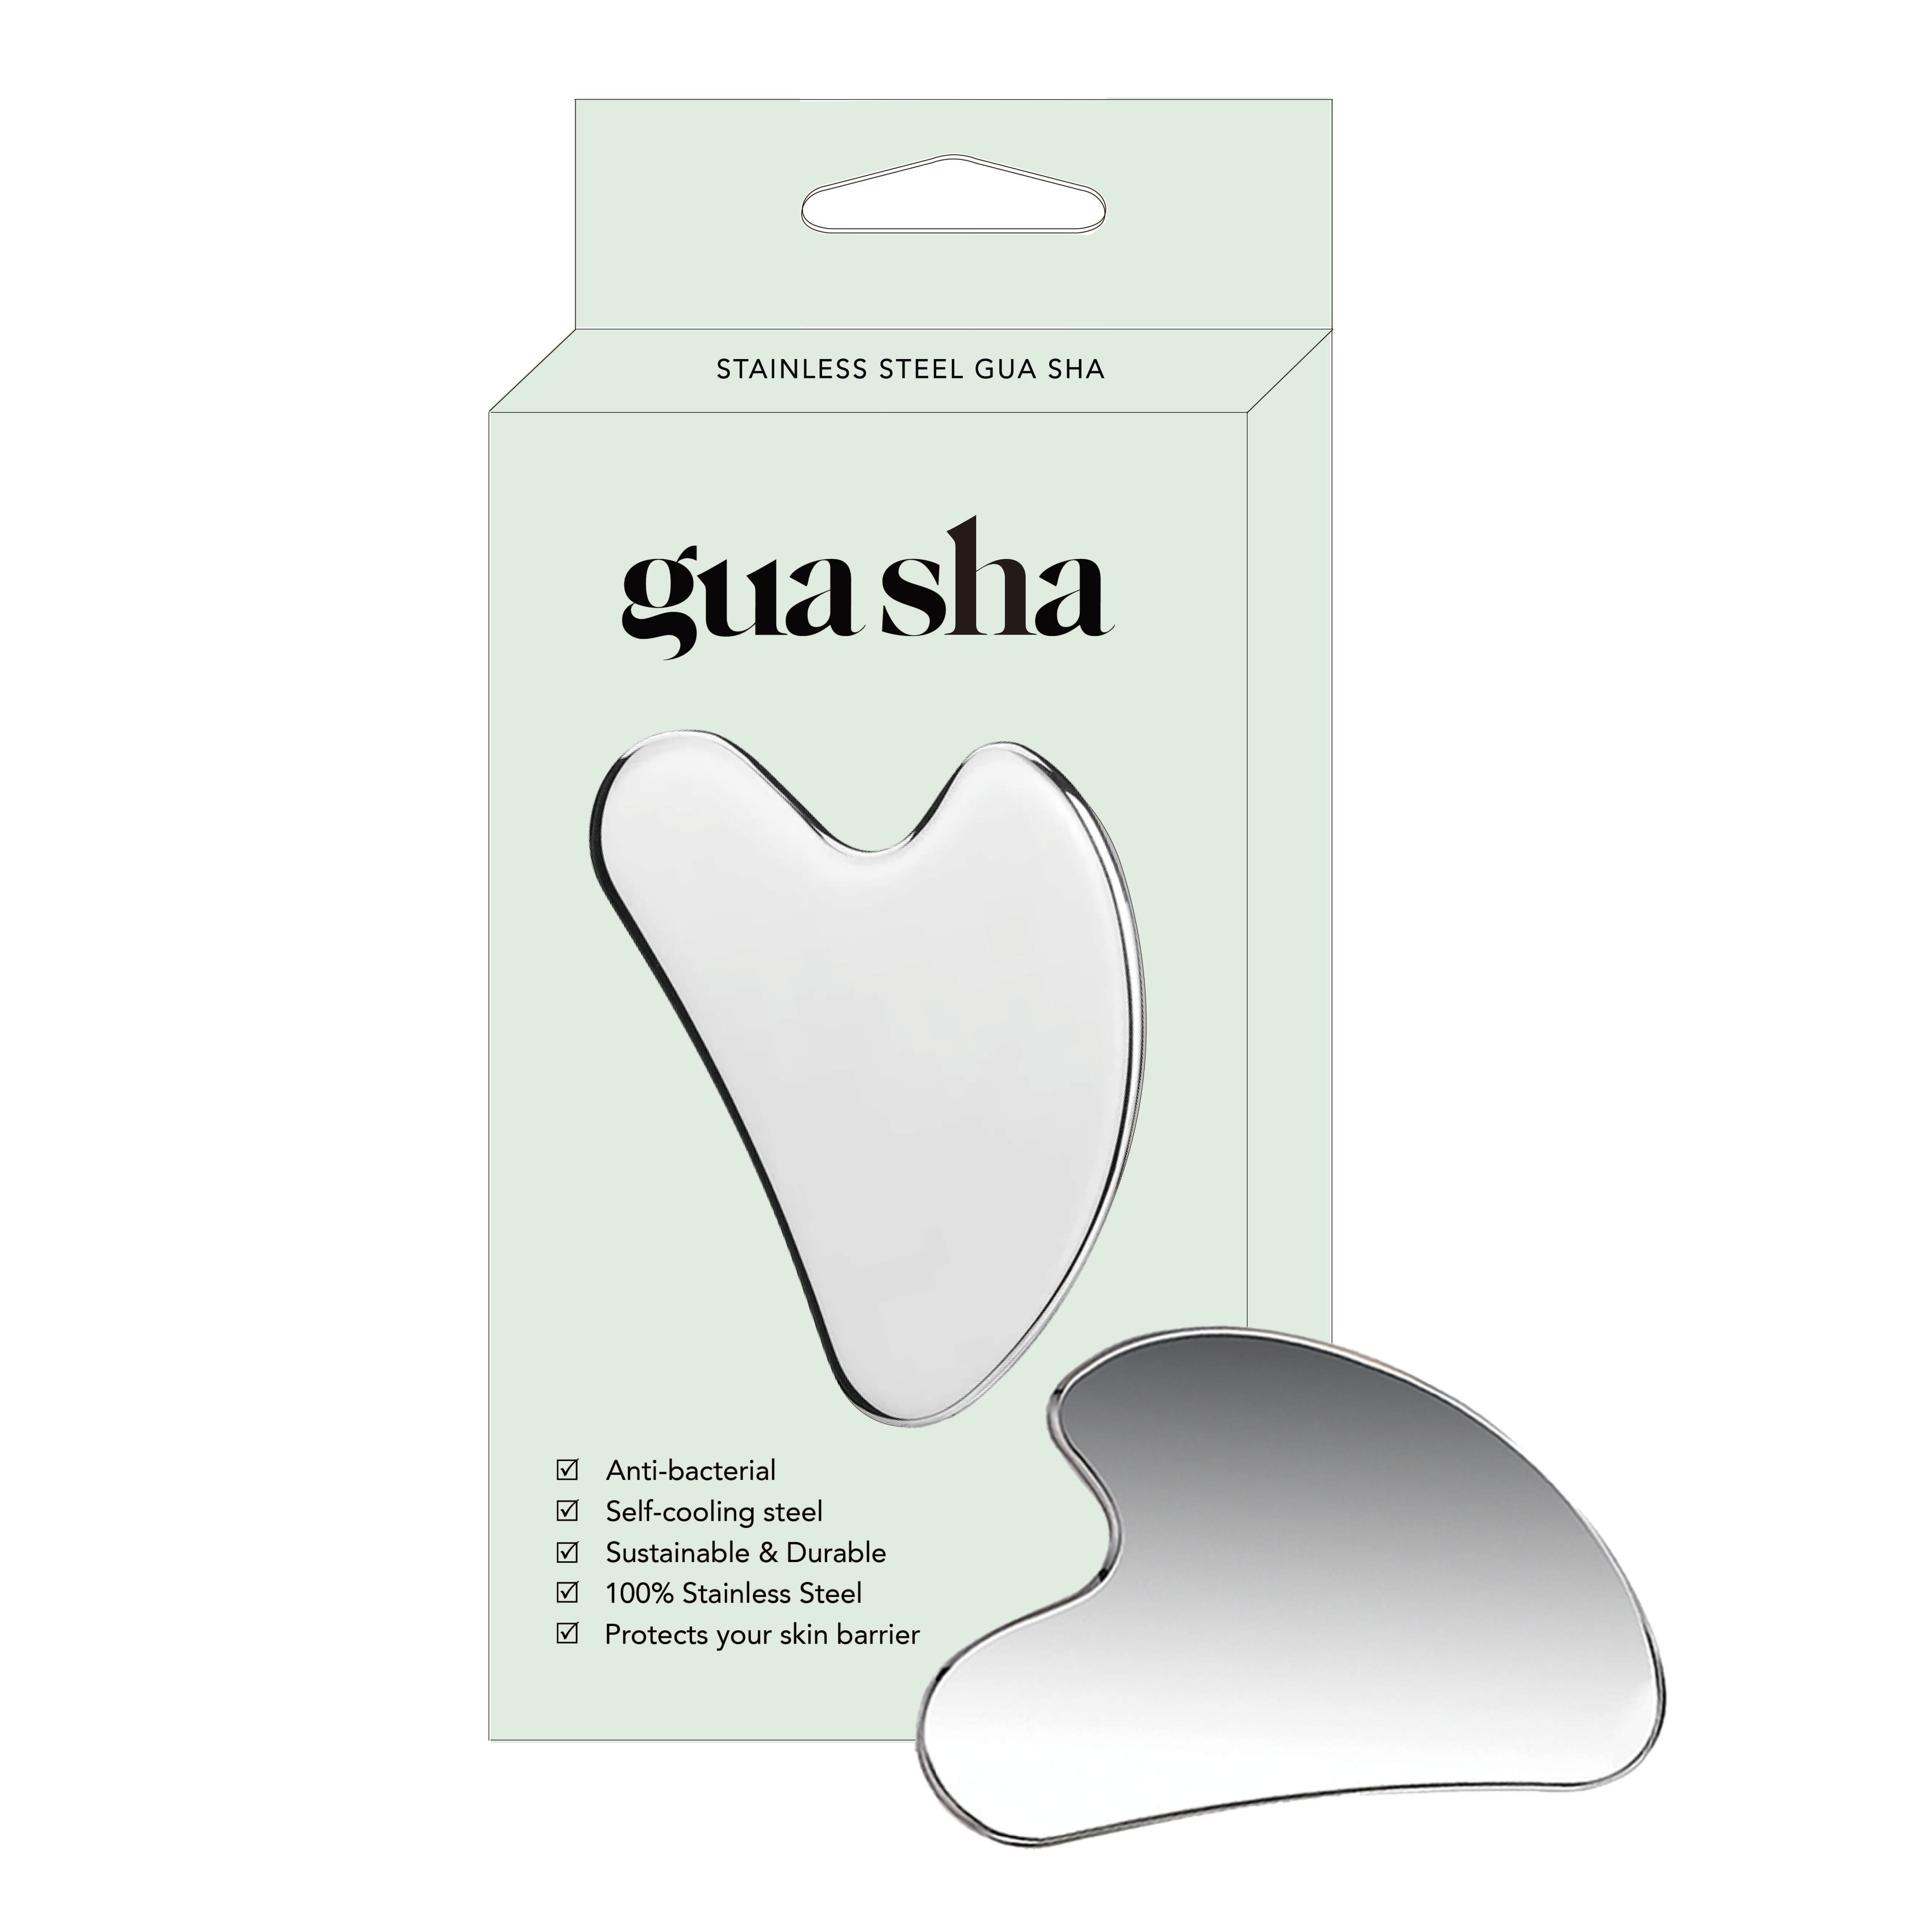 

Stainless Steel Gua Sha Facial Tool, Metal Gua Sha Massage Tool For Face And Body, Lymphatic Drainage, Facial Tension, Durable Stainless Steel Gua Sha Tool With Box - Mother's Day Gift